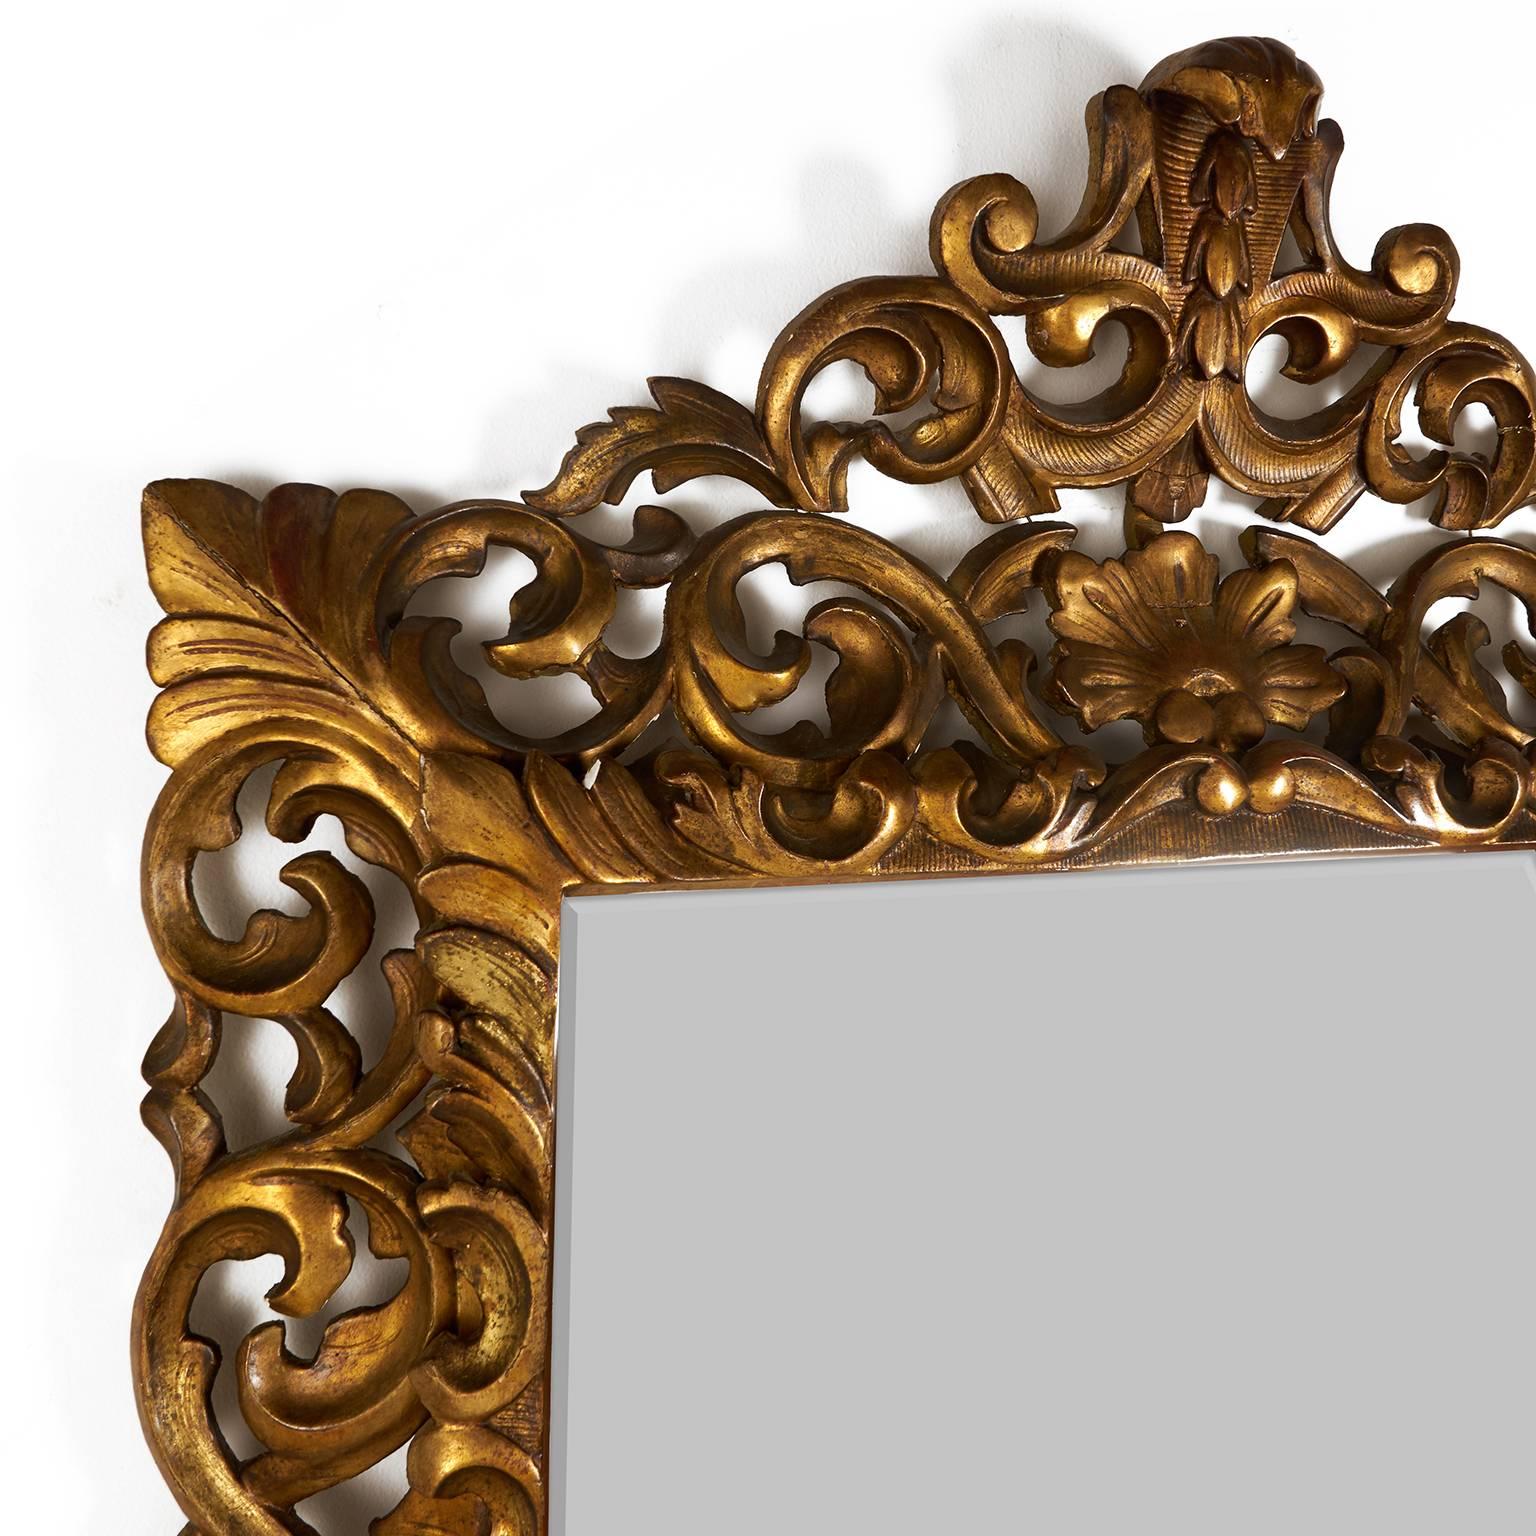 A boldly pierced and carved giltwood frame surrounding a bevelled mirror. French or possibly Italian, circa 1920.



